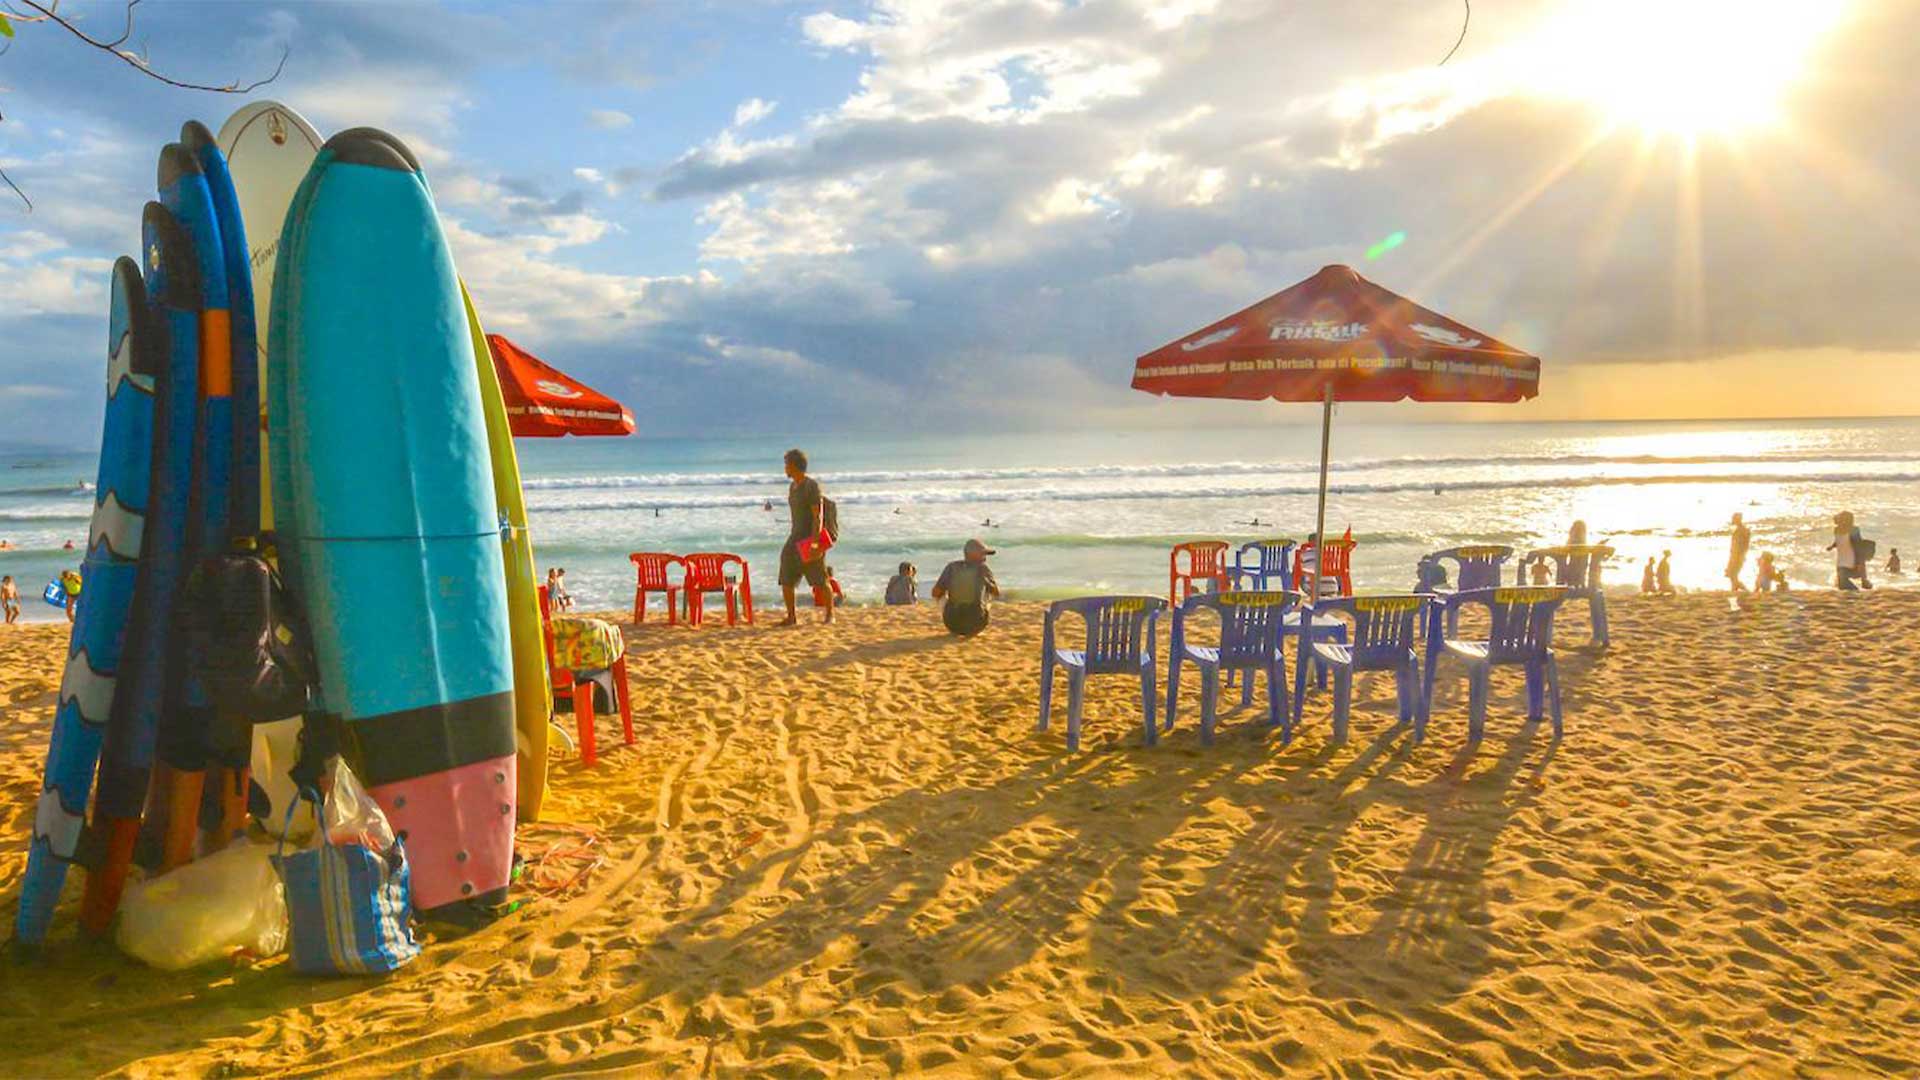 10 Amazing Things to do in Kuta for Vacation in Bali